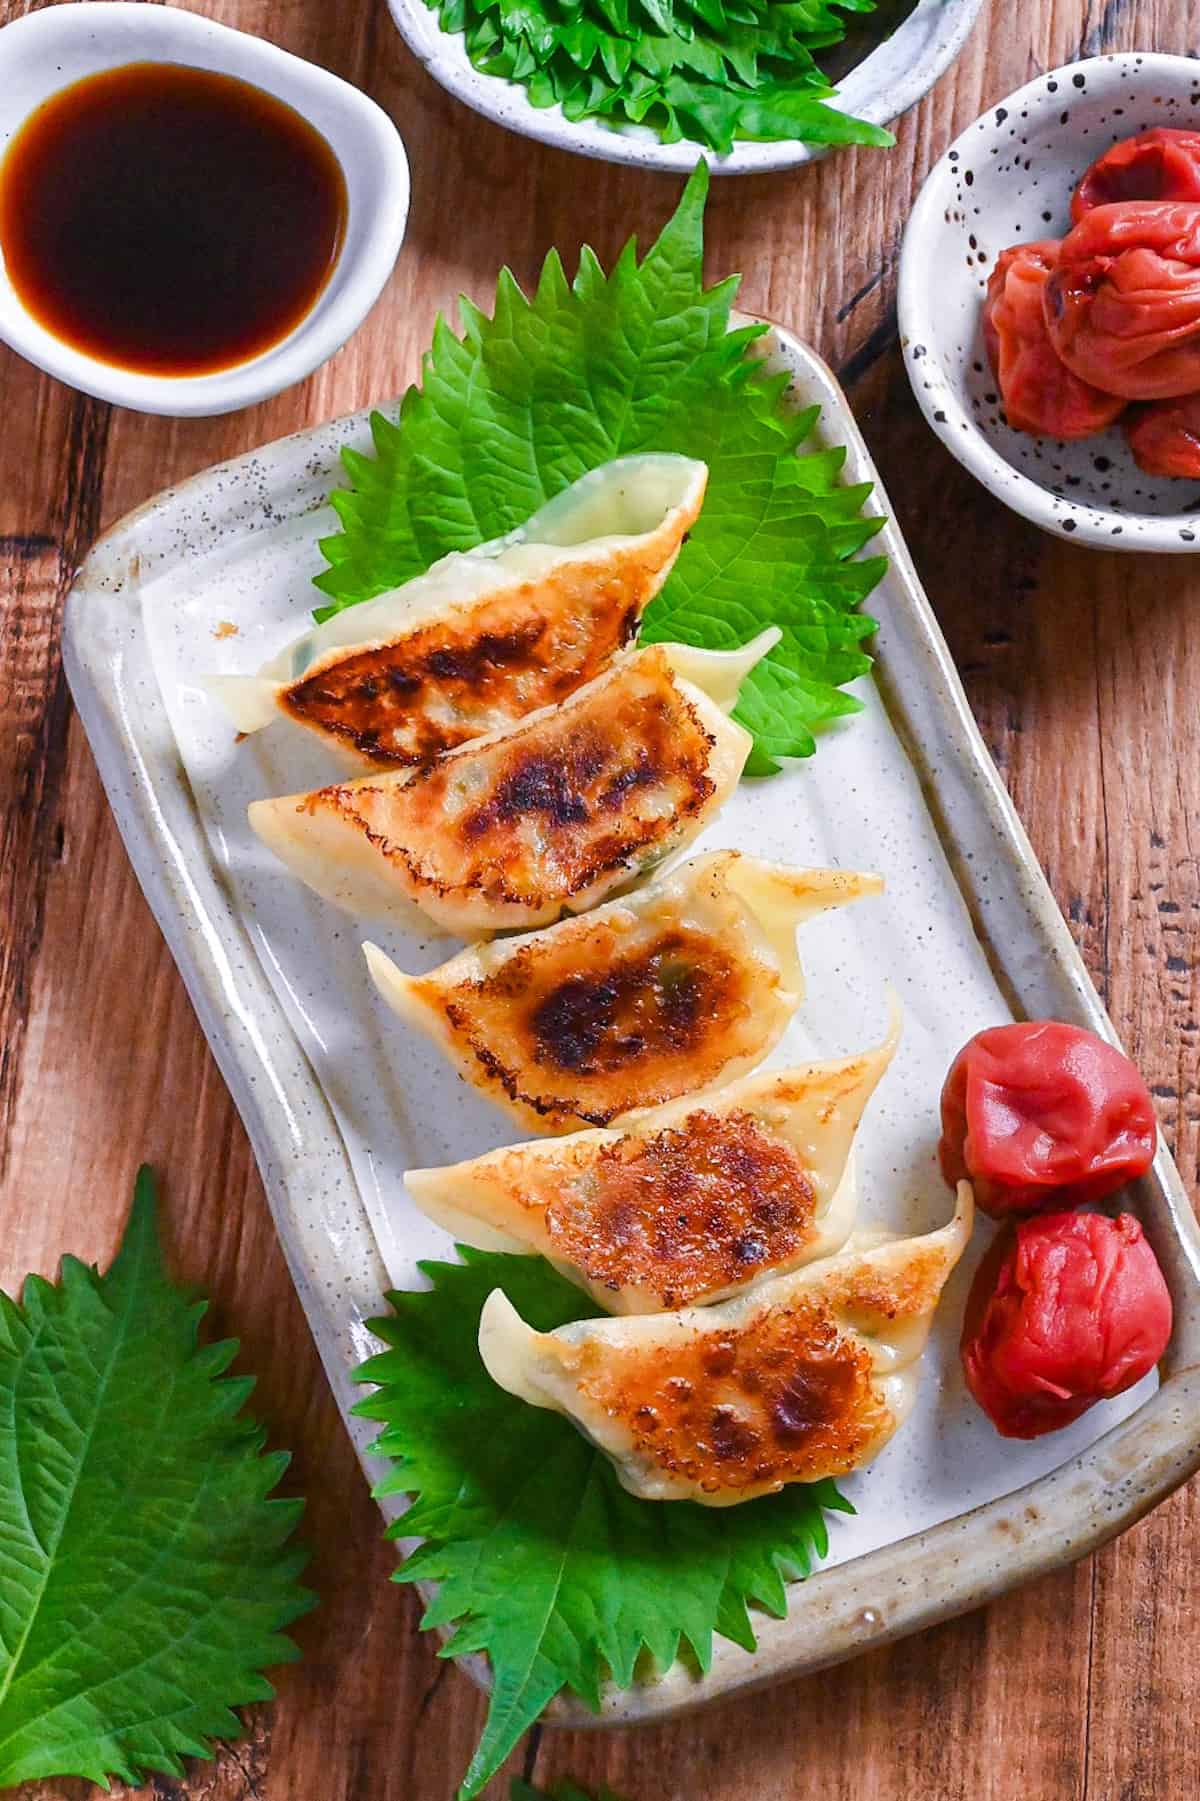 Chicken gyoza with umeboshi and perilla leaves (shiso) on a cream rectangular plate with ponzu dipping sauce